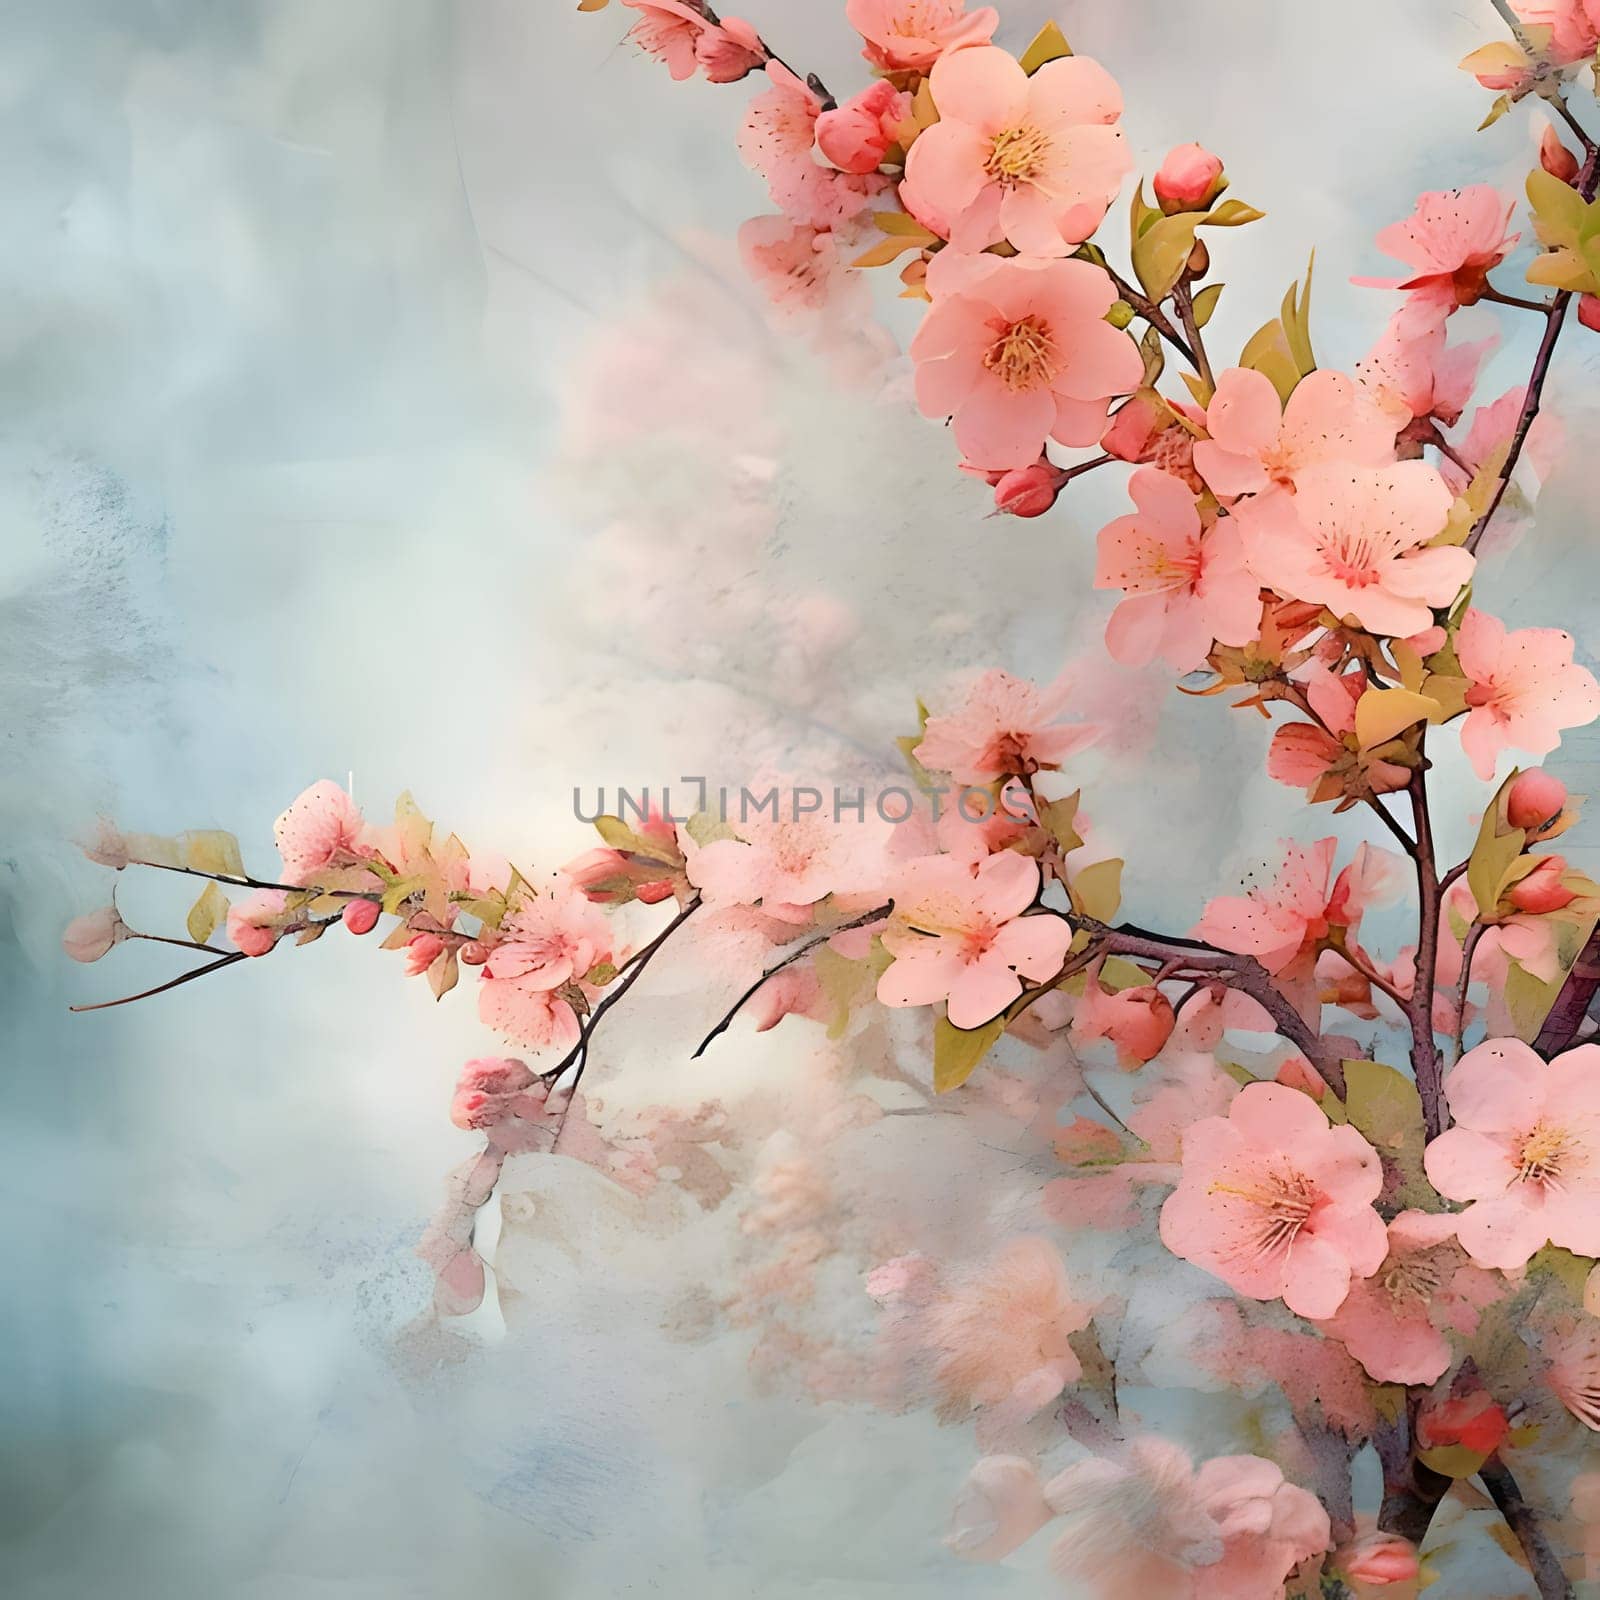 A frame adorned with cherry blossoms against a light background creates a delicate and visually pleasing composition.